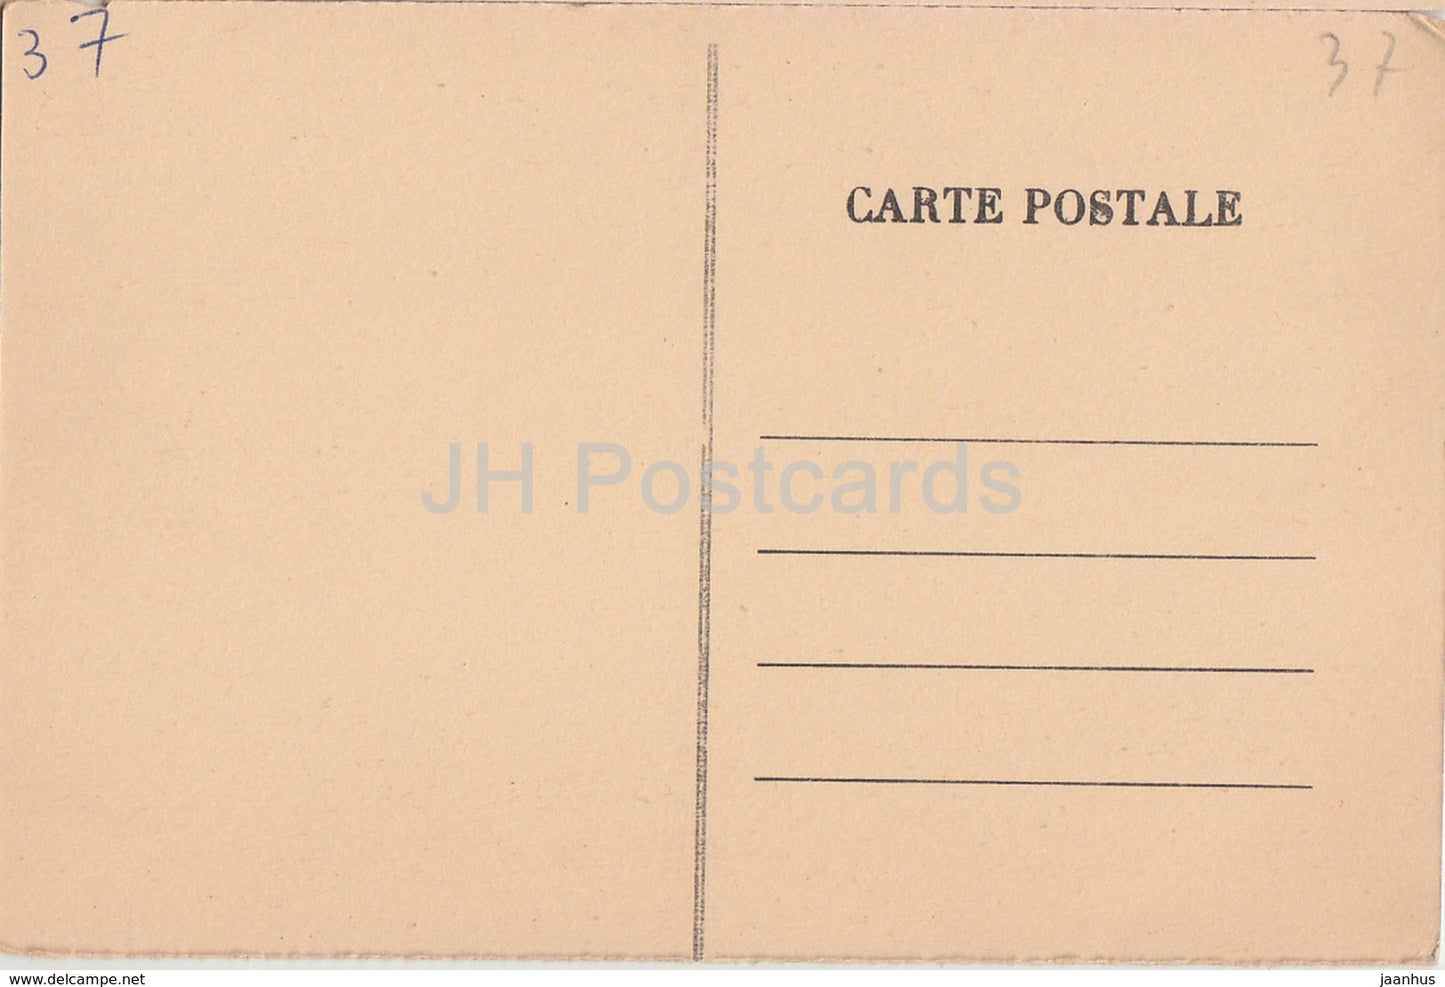 Loches - Chateau Royal - castle - old postcard - France - unused